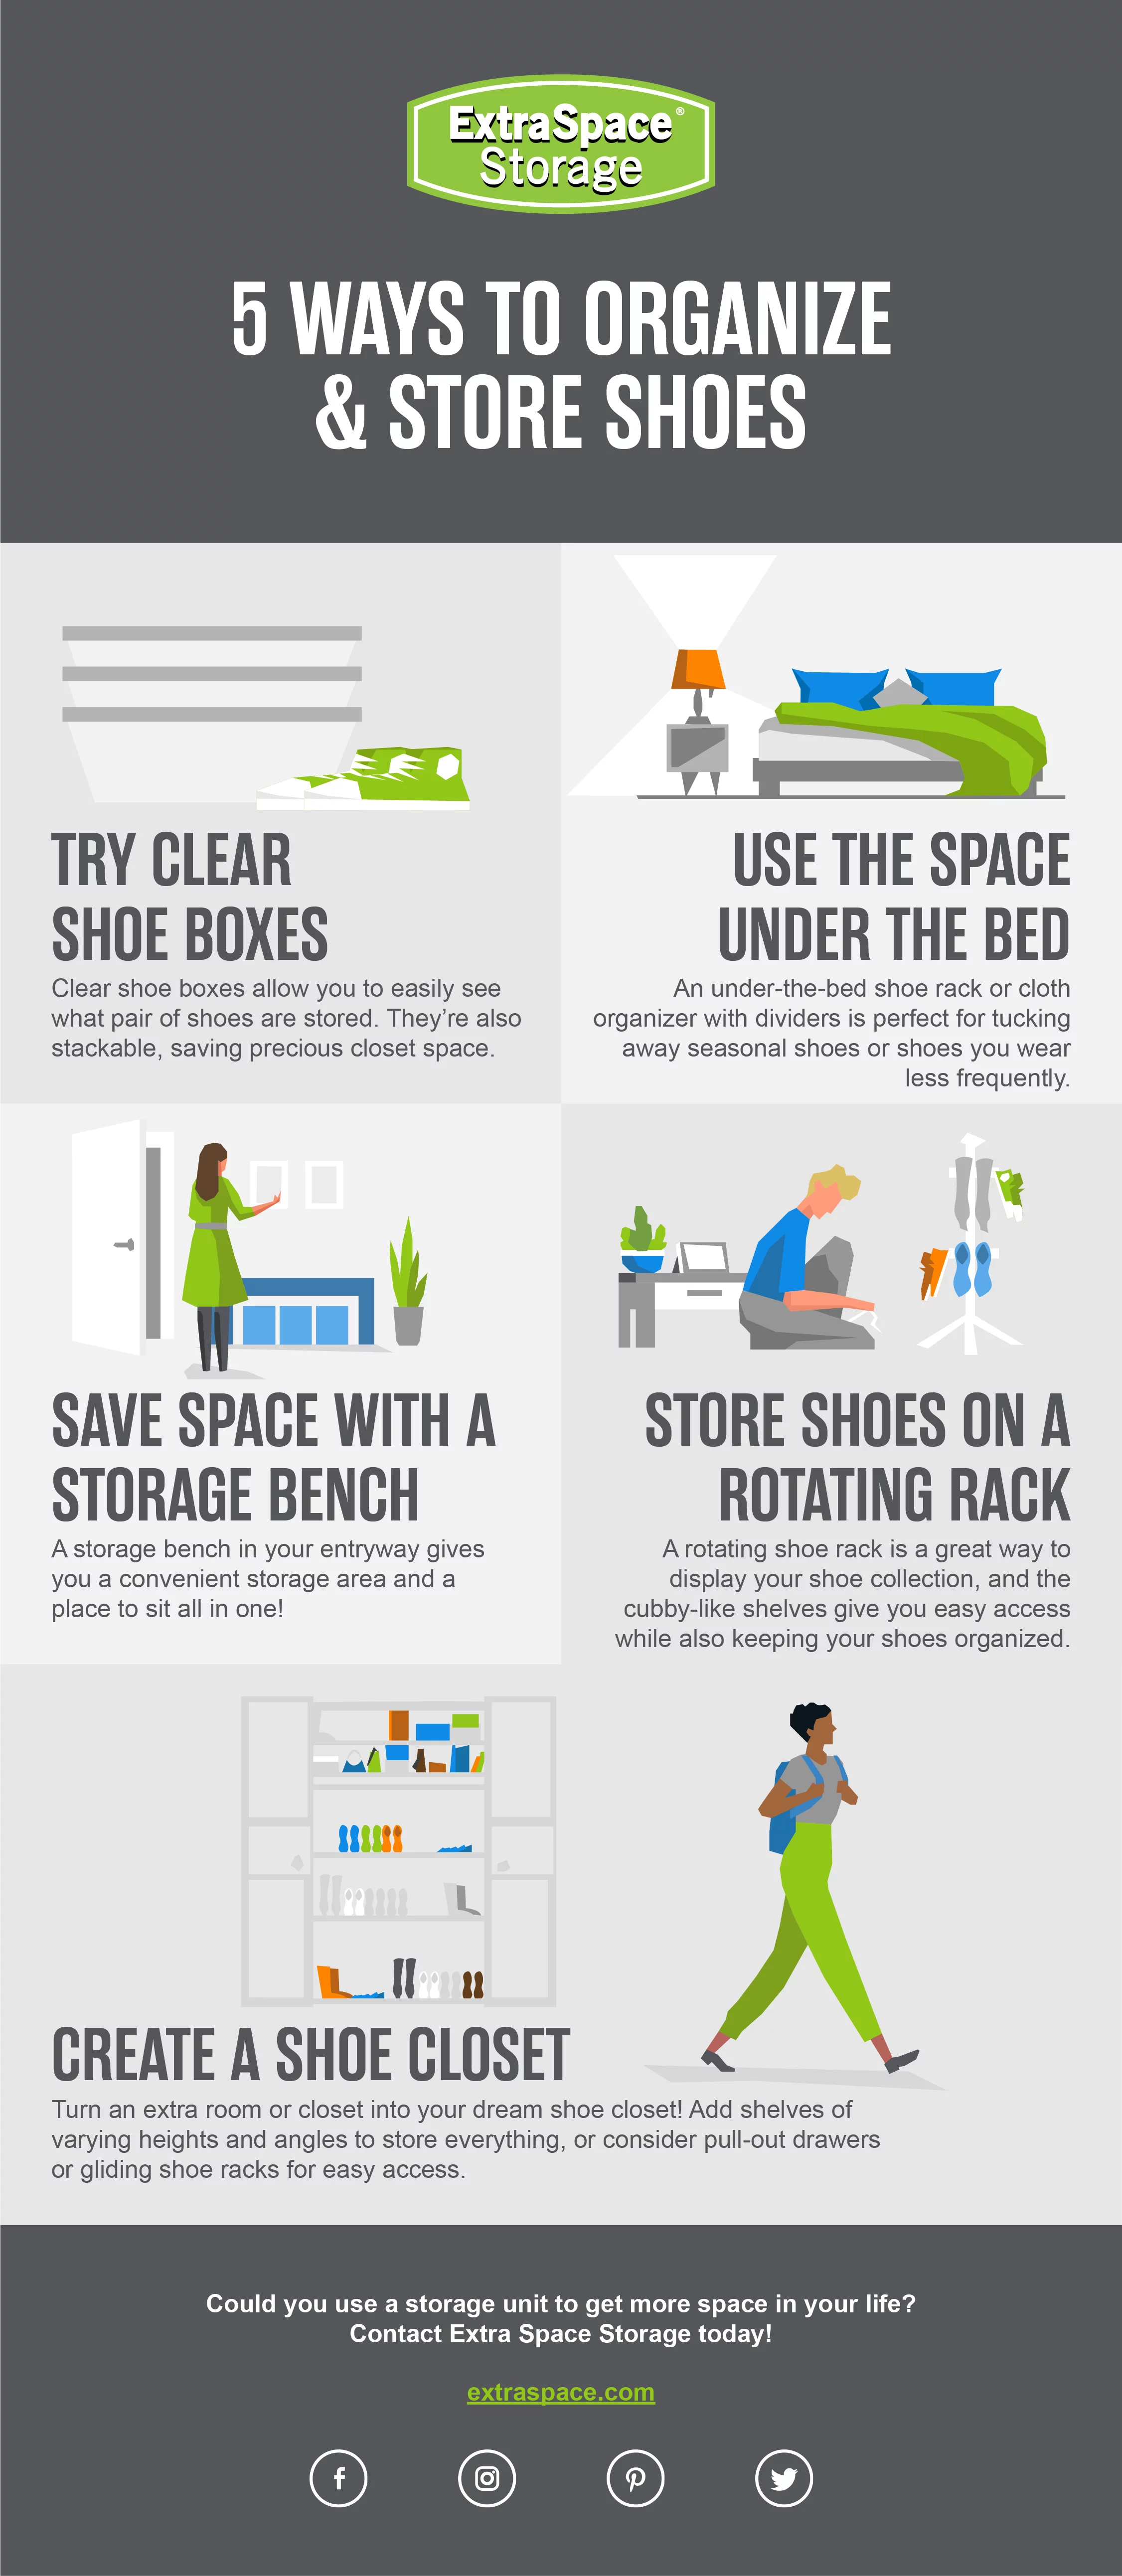 https://www.extraspace.com/blog/wp-content/uploads/2022/08/5-Ways-to-Organize-Store-Shoes.png.webp